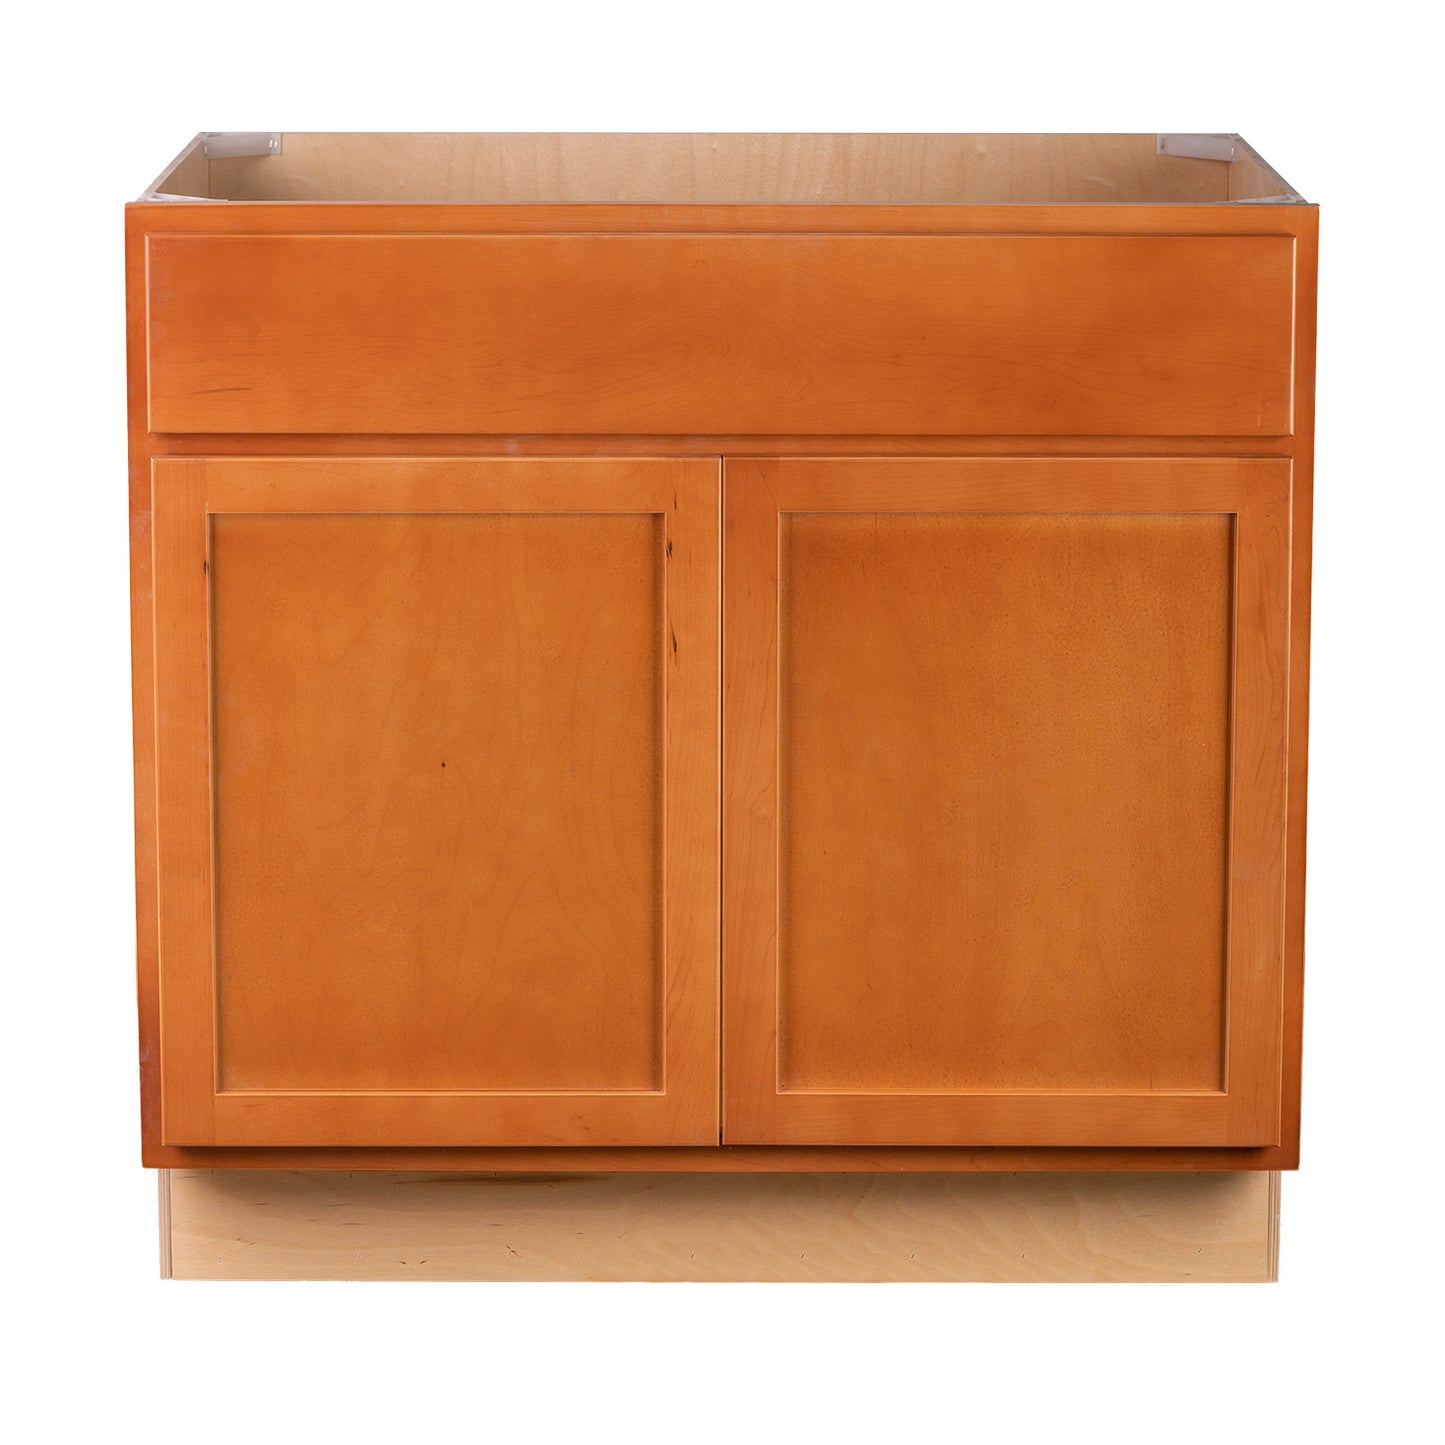 Quicklock RTA (Ready-to-Assemble) Provincial Stain Base Cabinet | 36"Wx34.5"Hx24"D